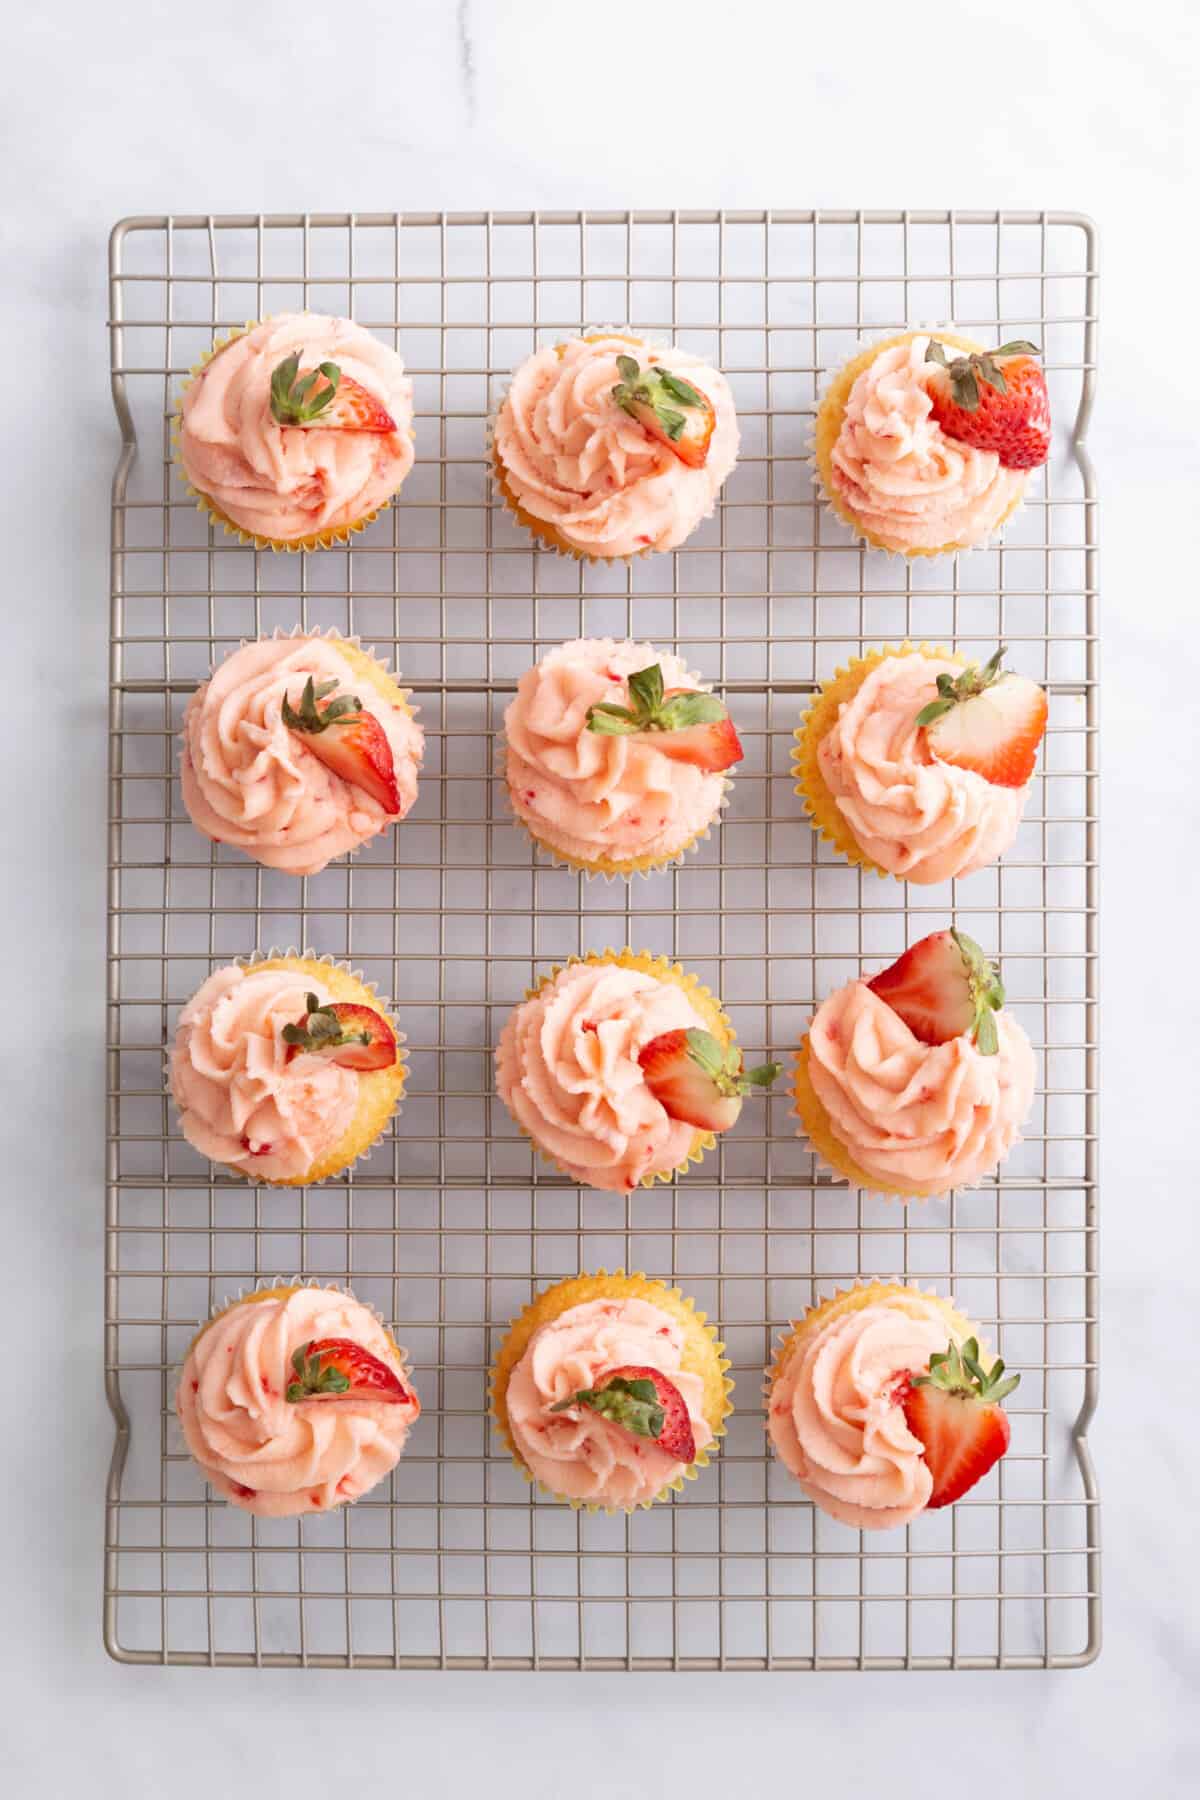 12 lemon strawberry cupcakes cooling on a wire rack.